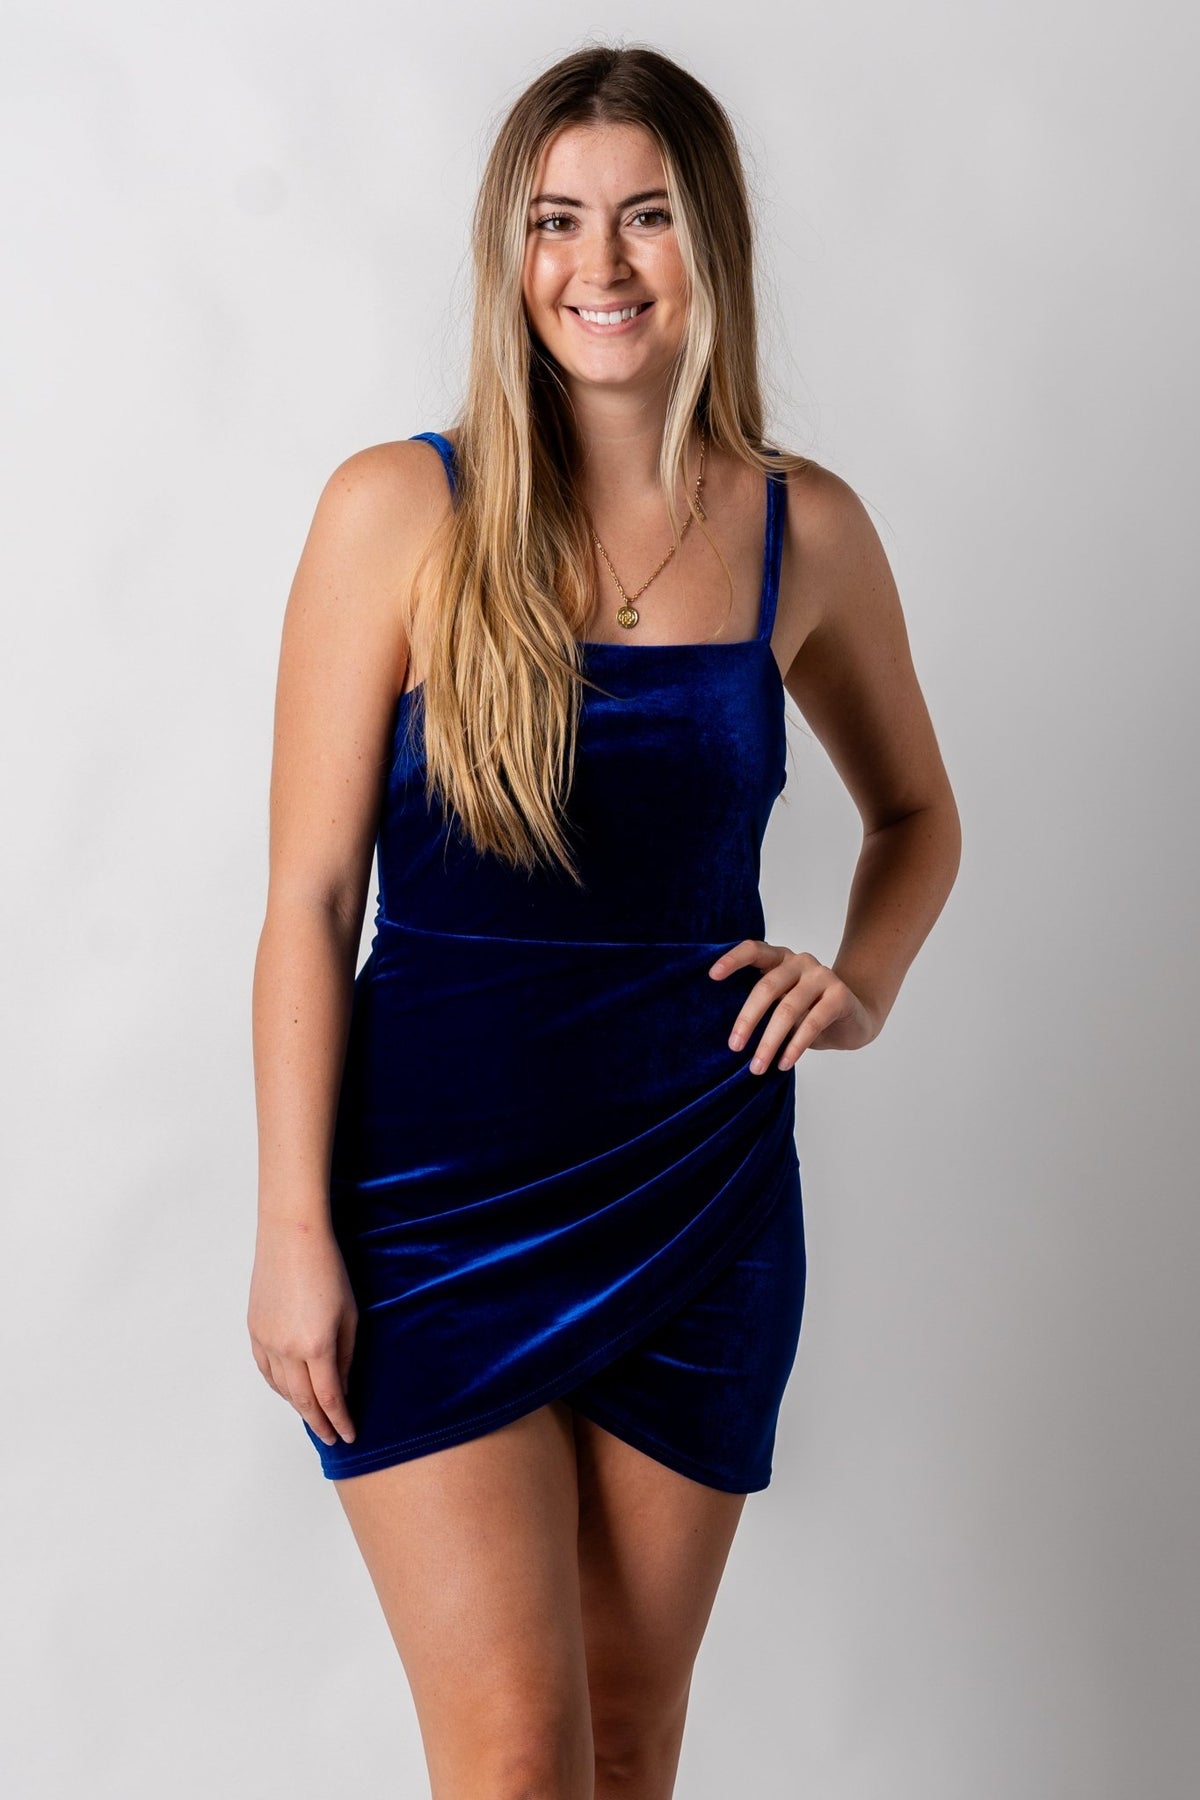 Velvet wrap mini dress royal blue - Trendy New Year's Eve Outfits at Lush Fashion Lounge Boutique in Oklahoma City